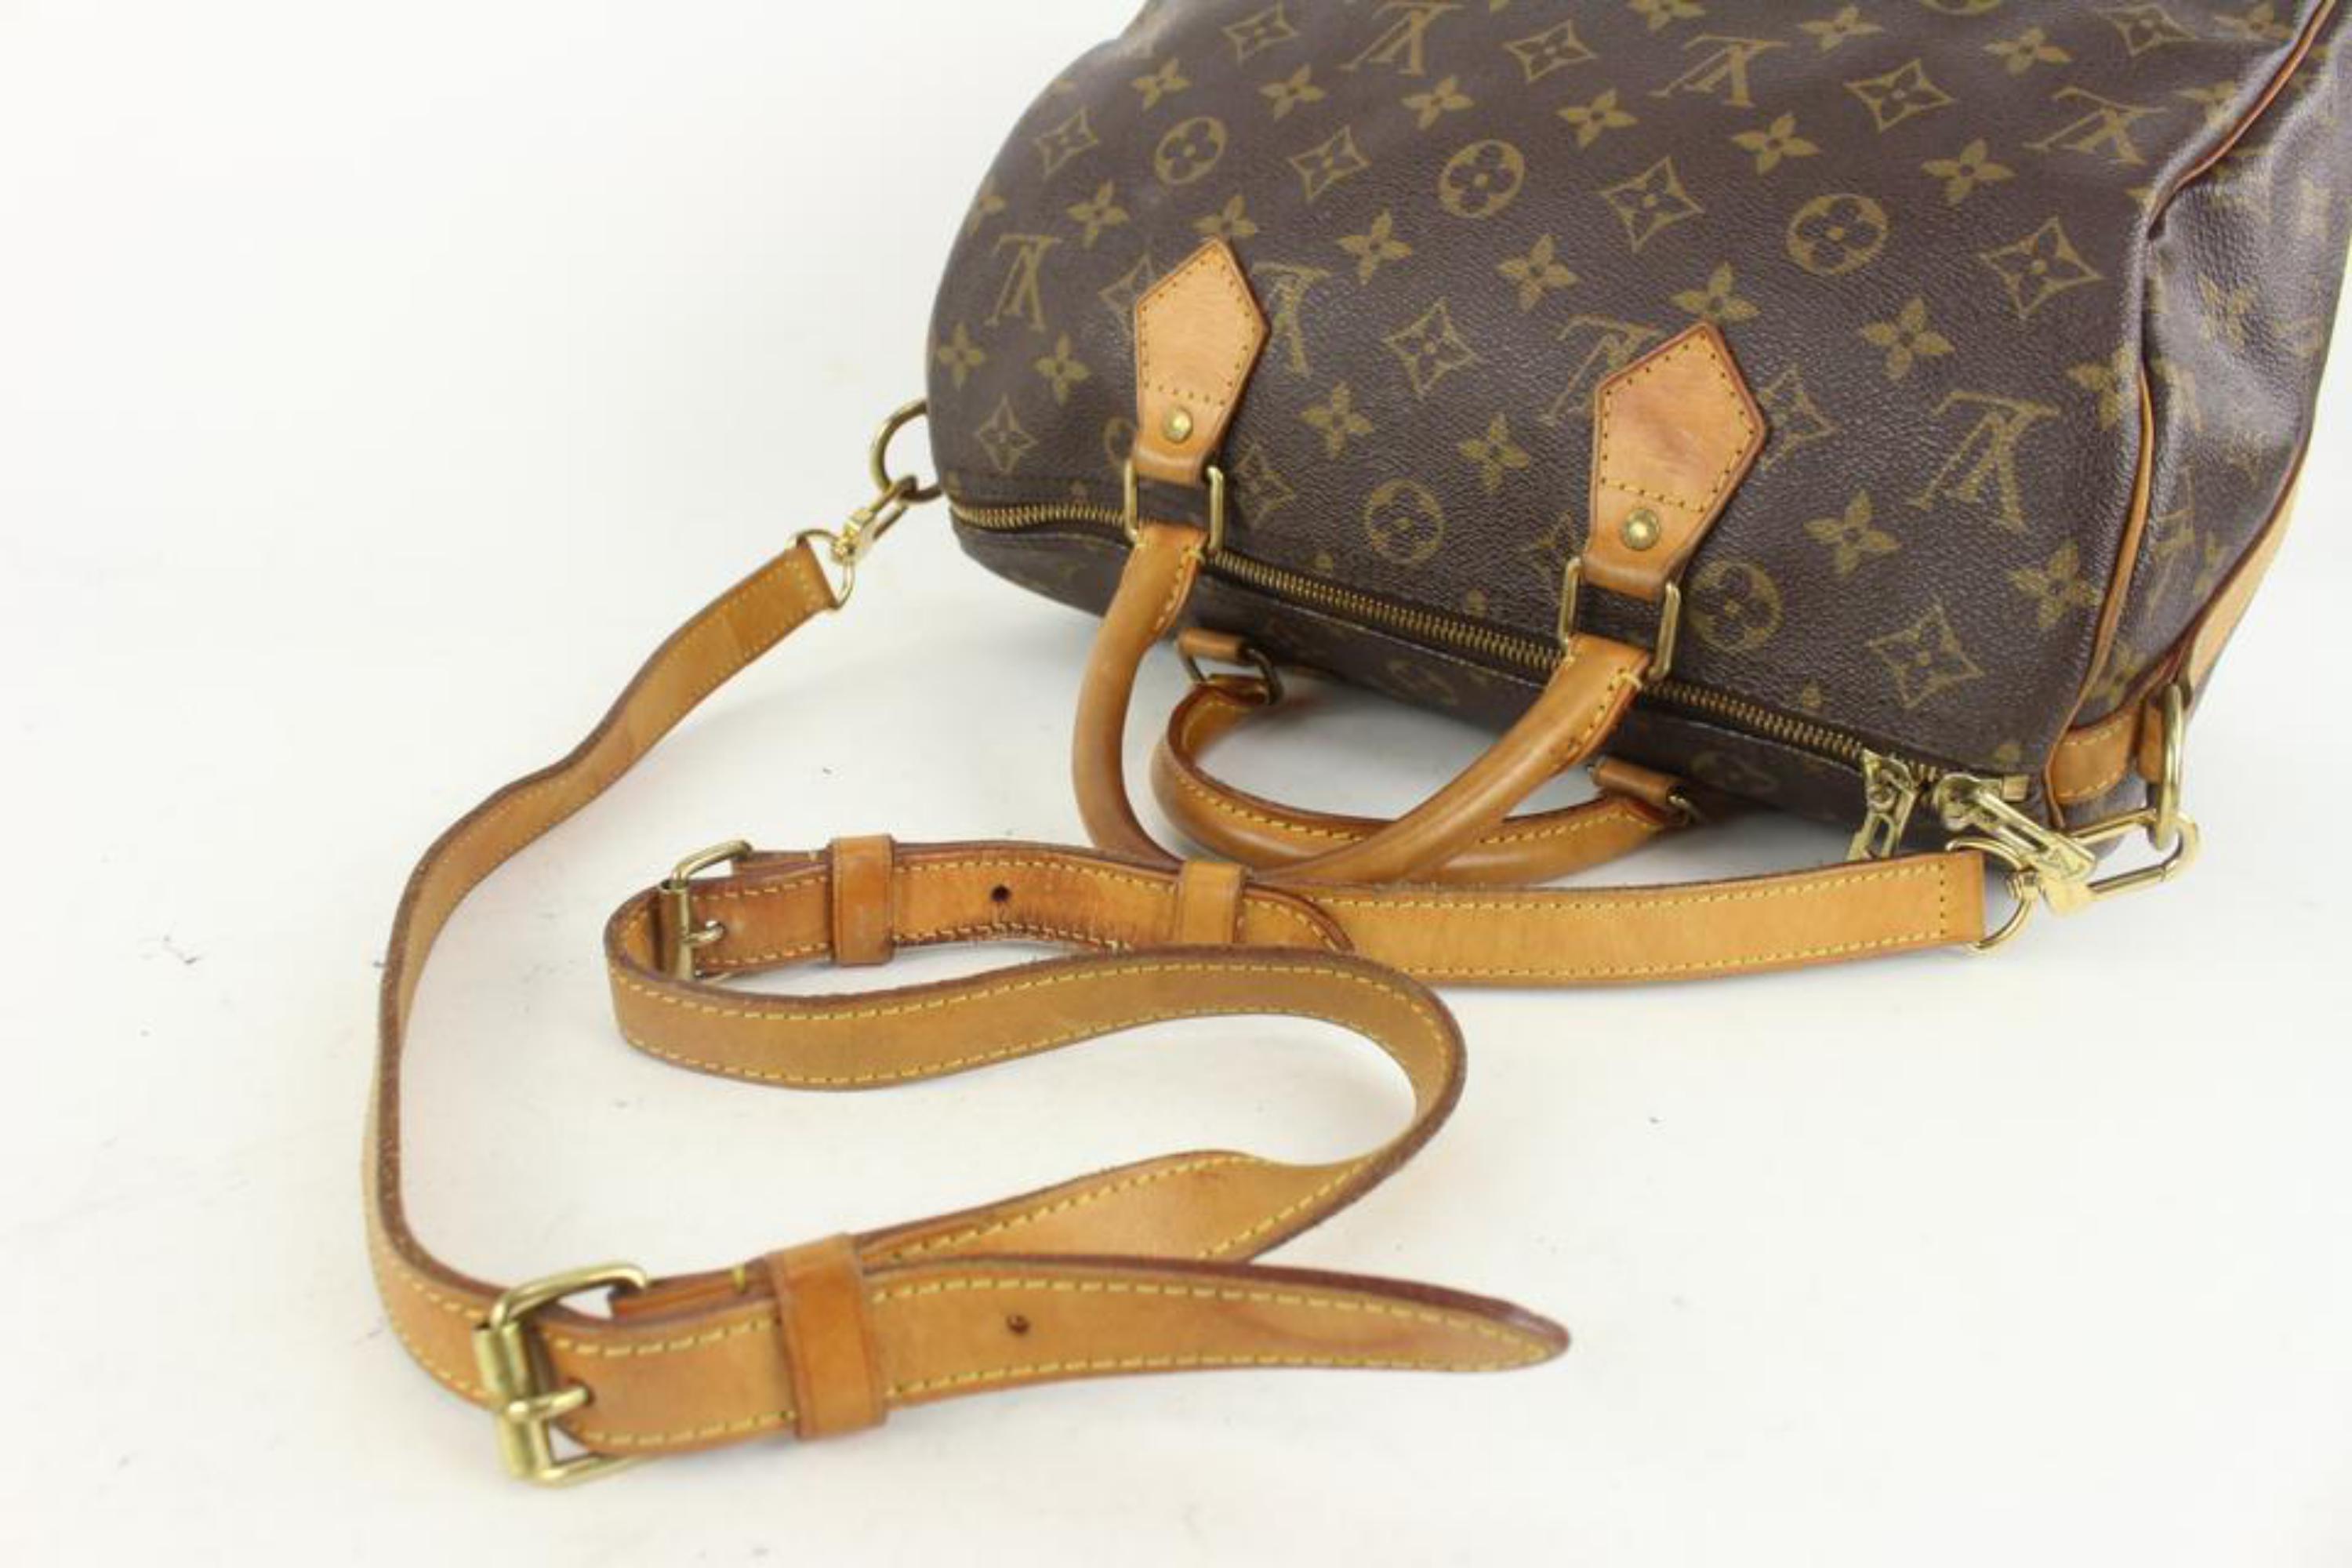 Louis Vuitton Monogram Speedy Bandouliere 30 Boston with Strap 1110lv12 In Good Condition For Sale In Dix hills, NY